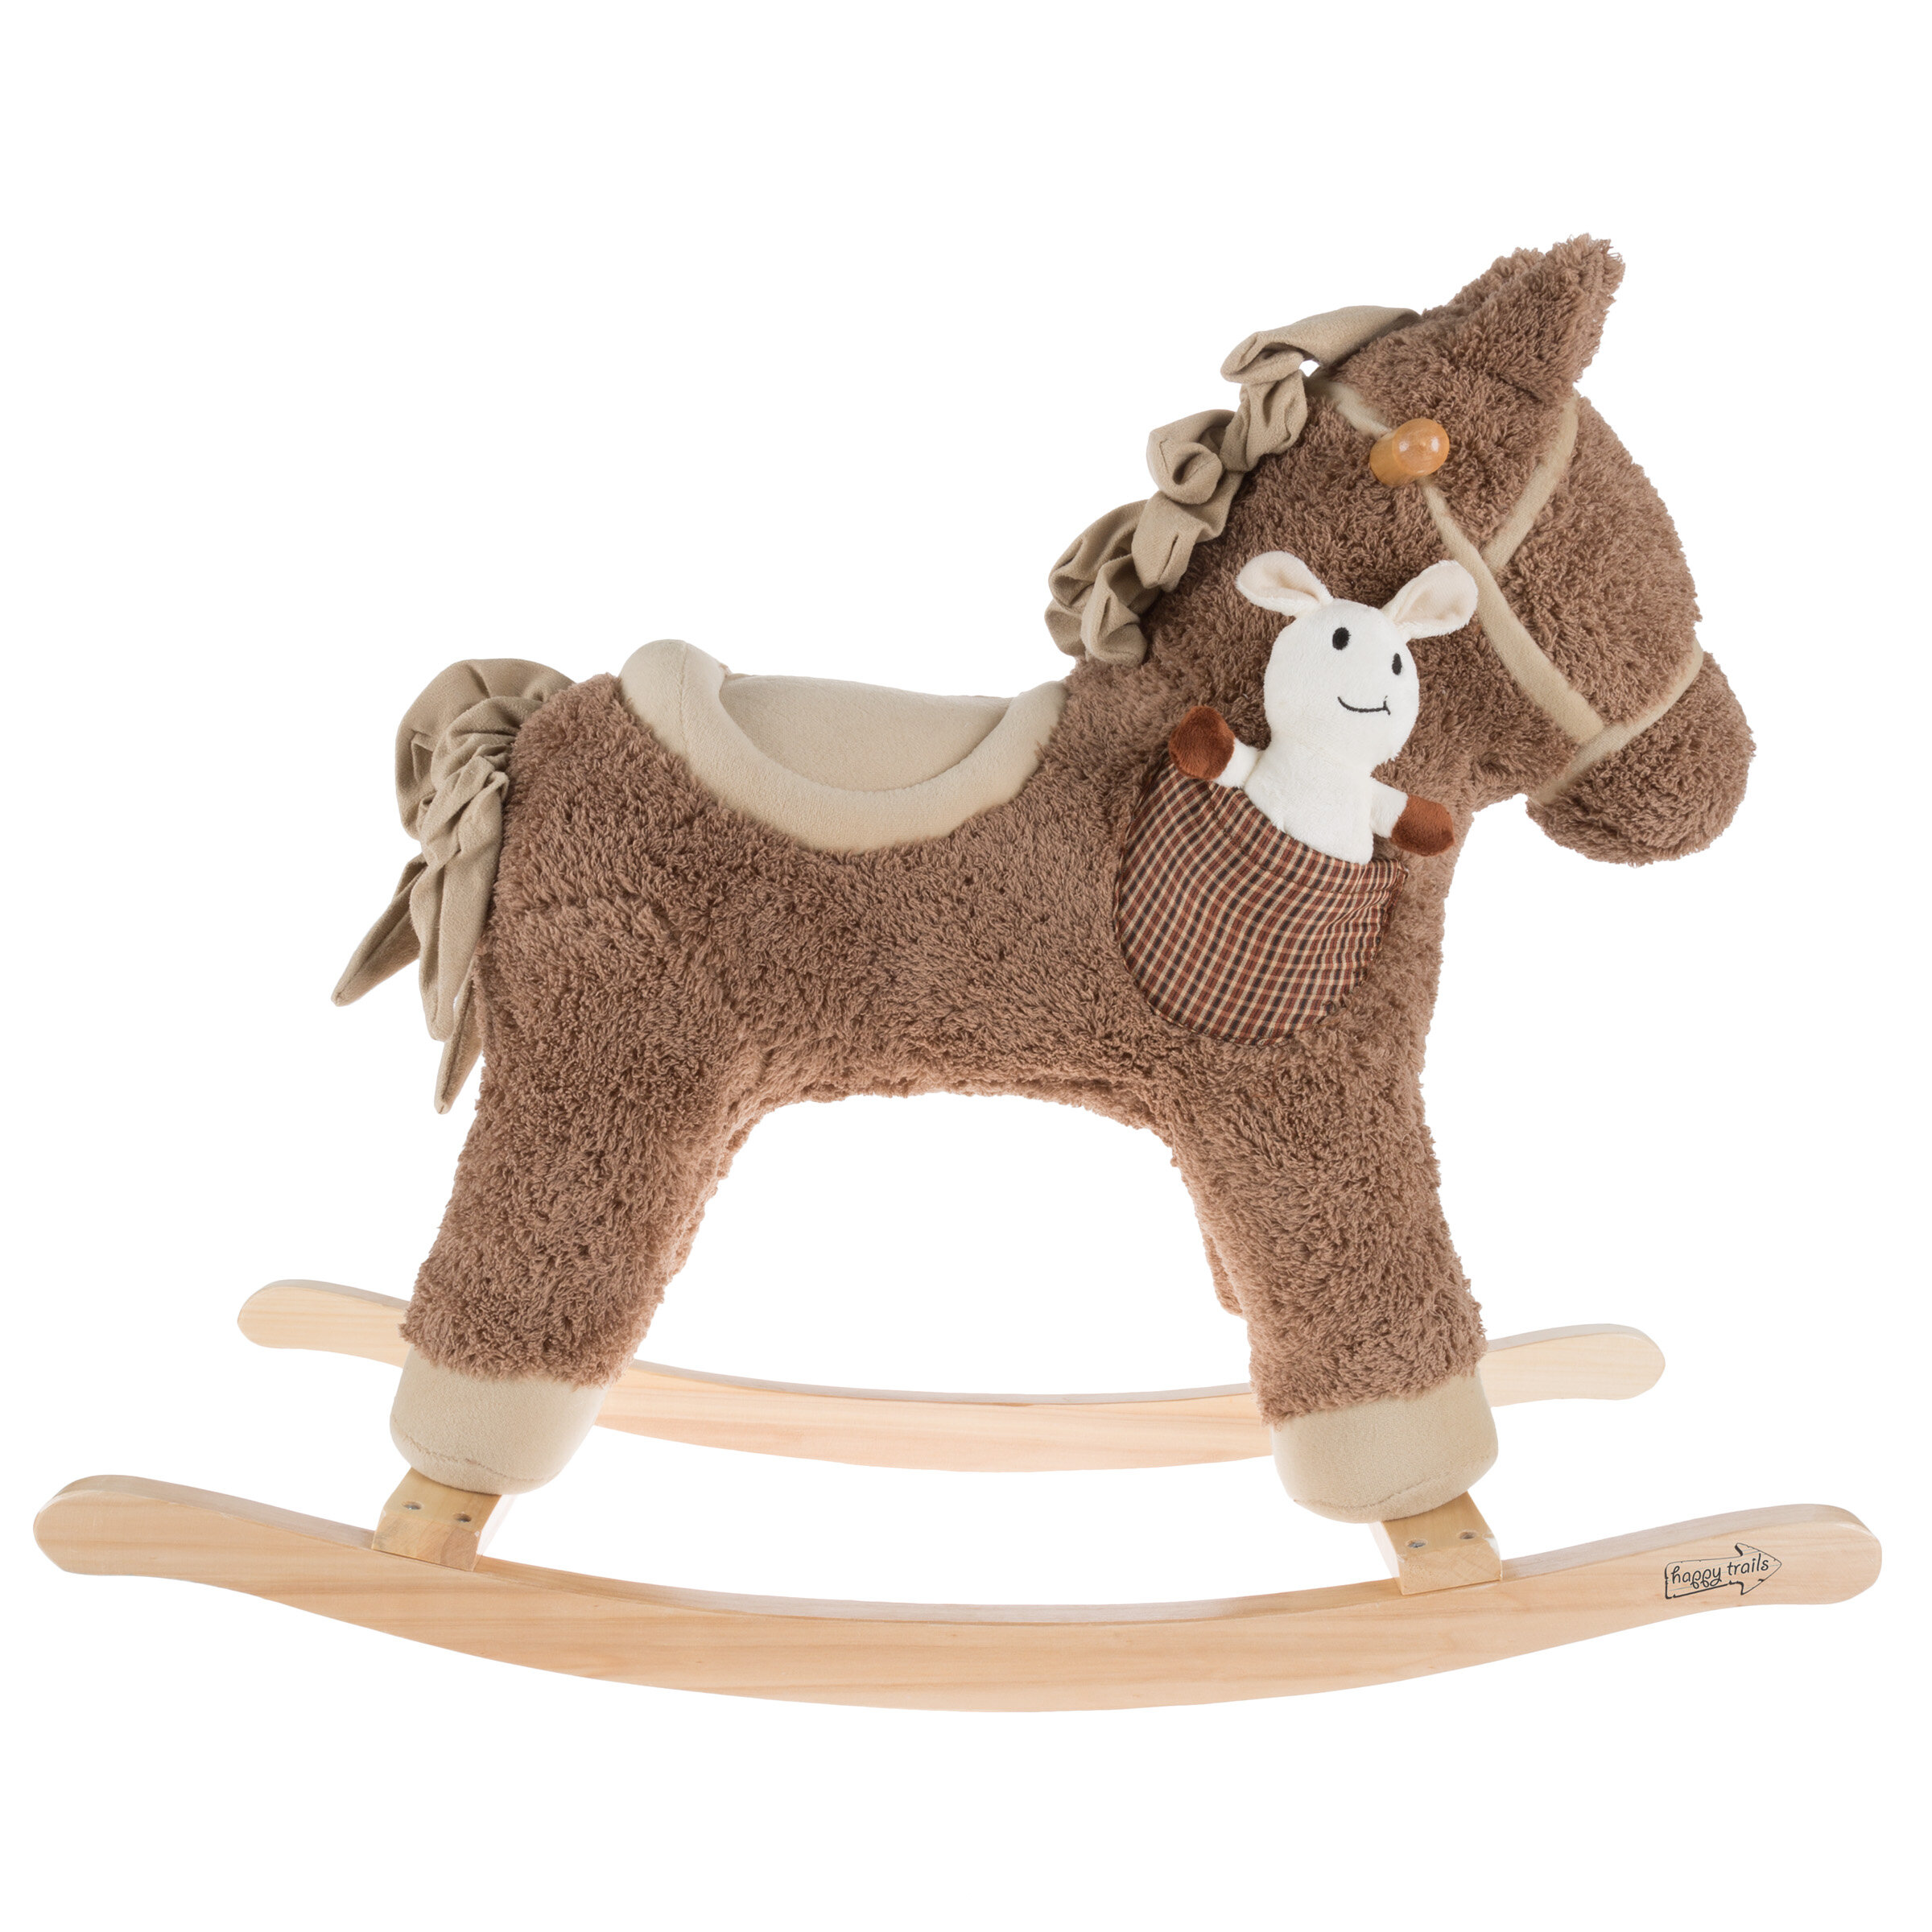 rocking horse that neighs